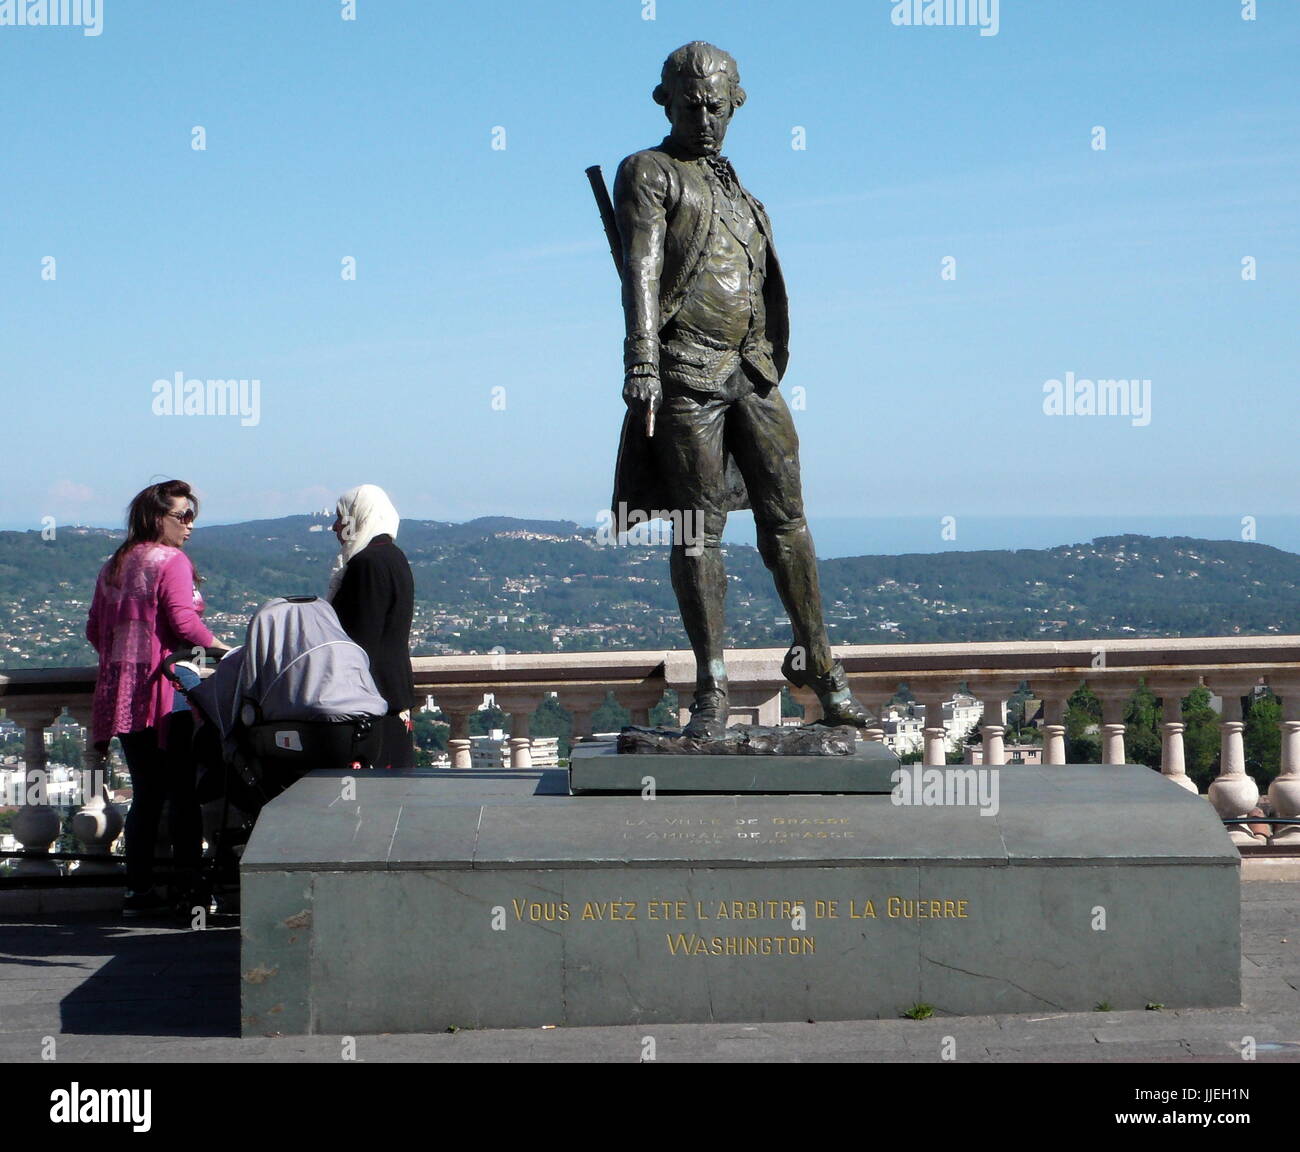 AJAXNETPHOTO. GRASSE, FRANCE. - FRENCH NAVAL ADMIRAL - STATUE OF FRANCOIS-JOSPEH PAUL, MARQUIS DE GRASSE TILLY, FRENCH NAVAL ADMIRAL WHO DEFEATED THE BRITISH AT THE BATTLE OF CHESAPEAKE IN 1781. PHOTO;CAROLINE BEAUMONT/AJAX REF:P1080423 1 Stock Photo